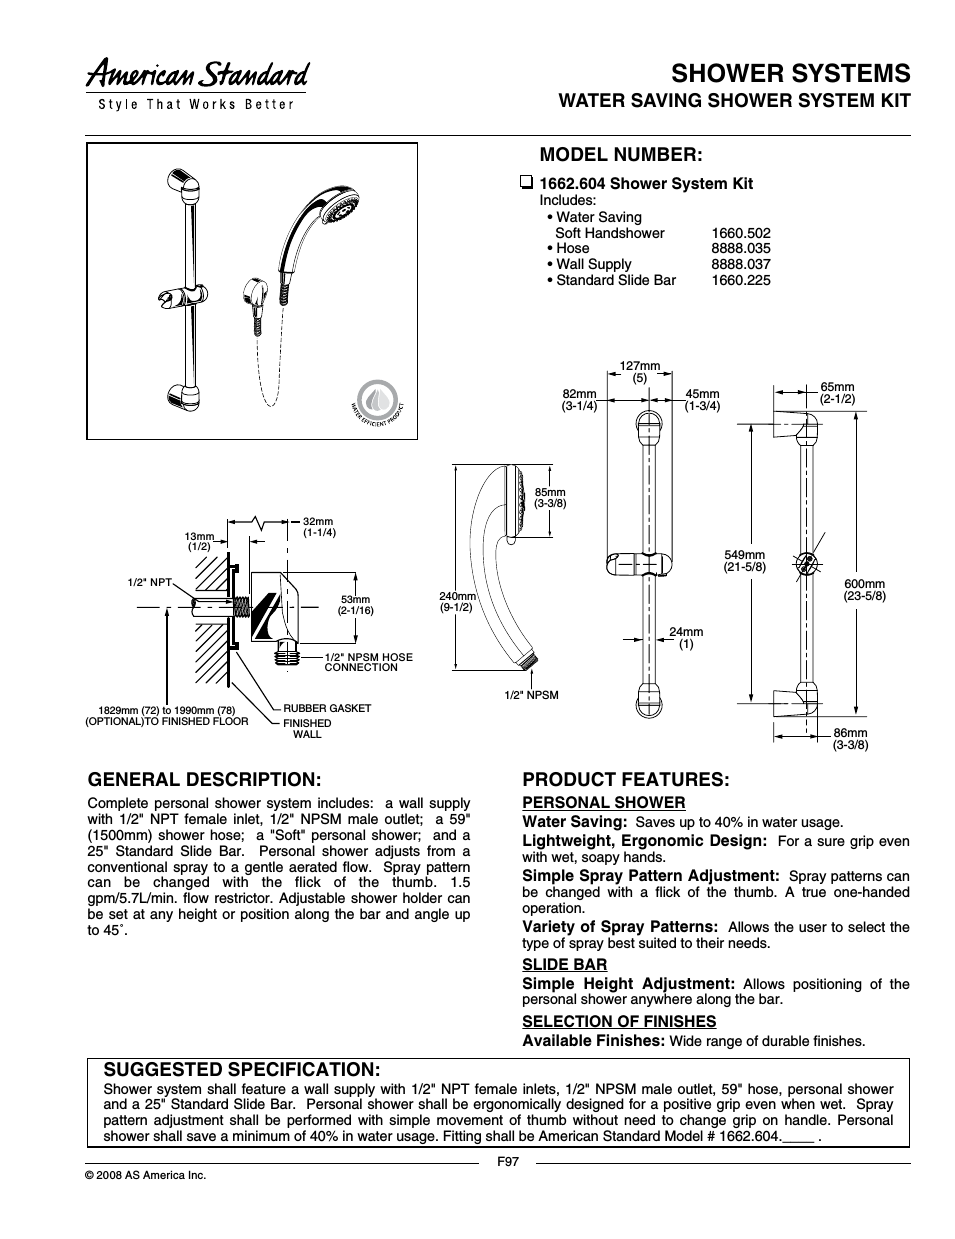 Shower Systems 8888.037